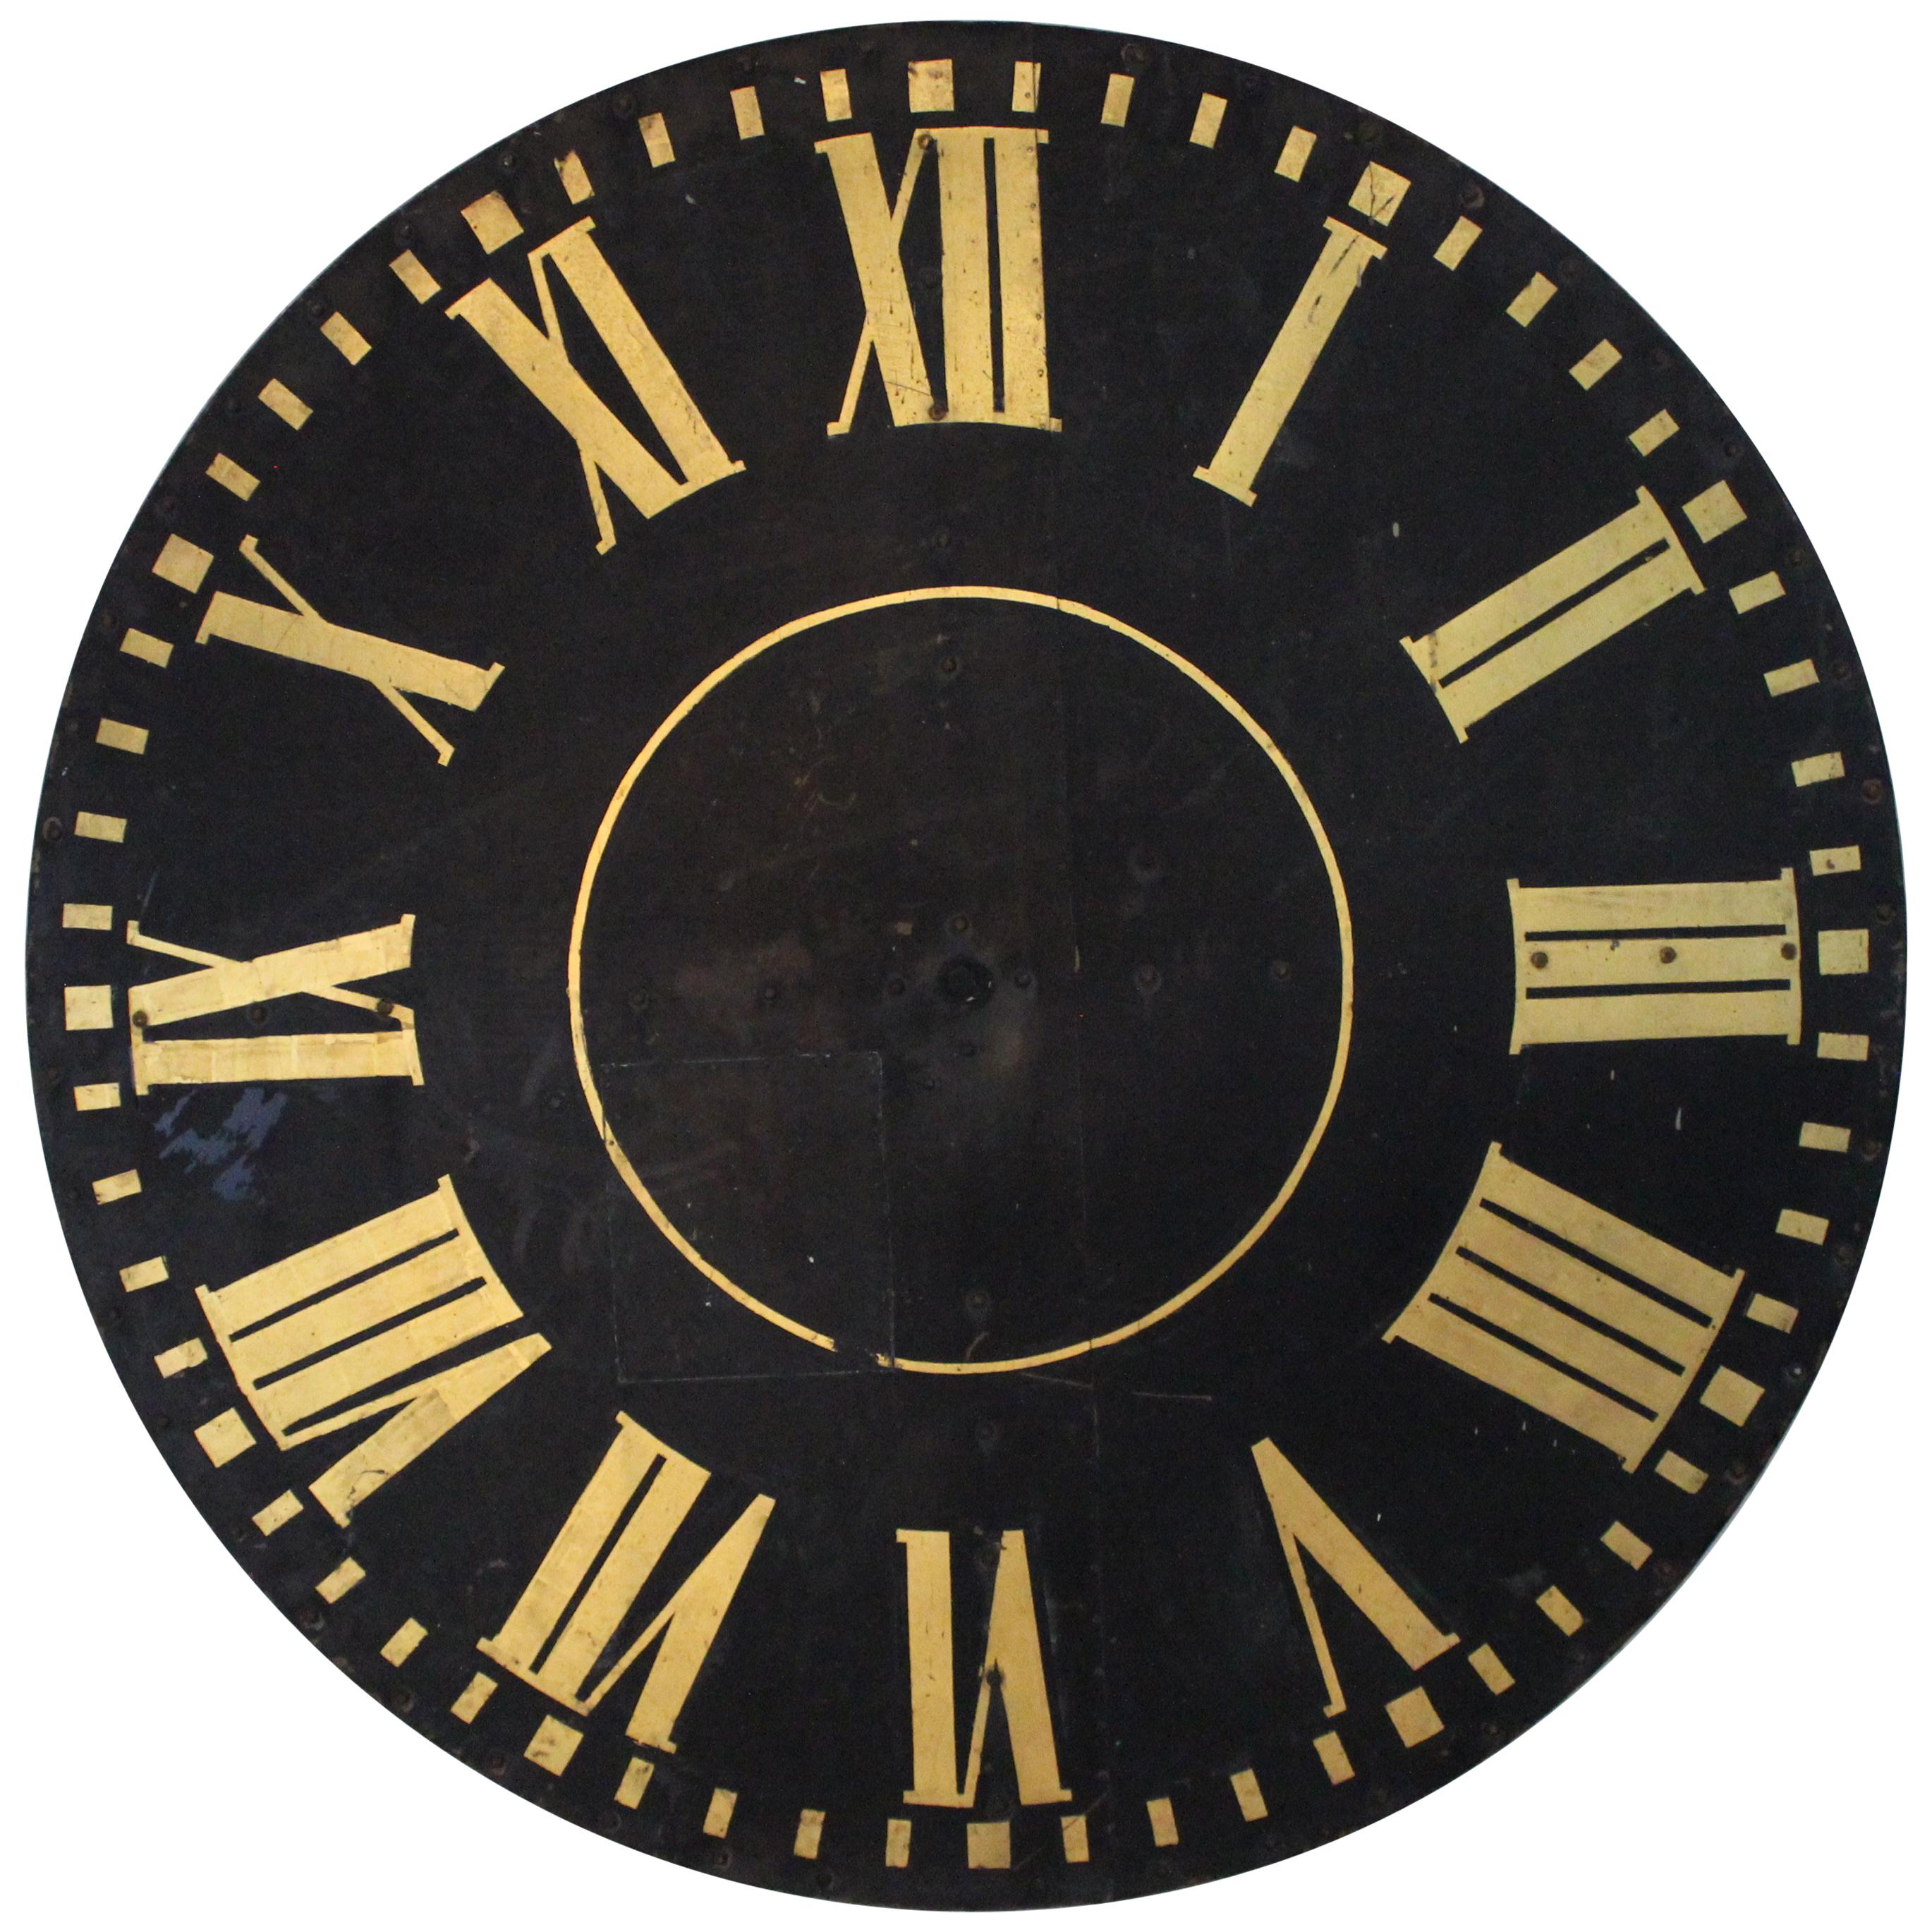 Monumental Tower Clock Face